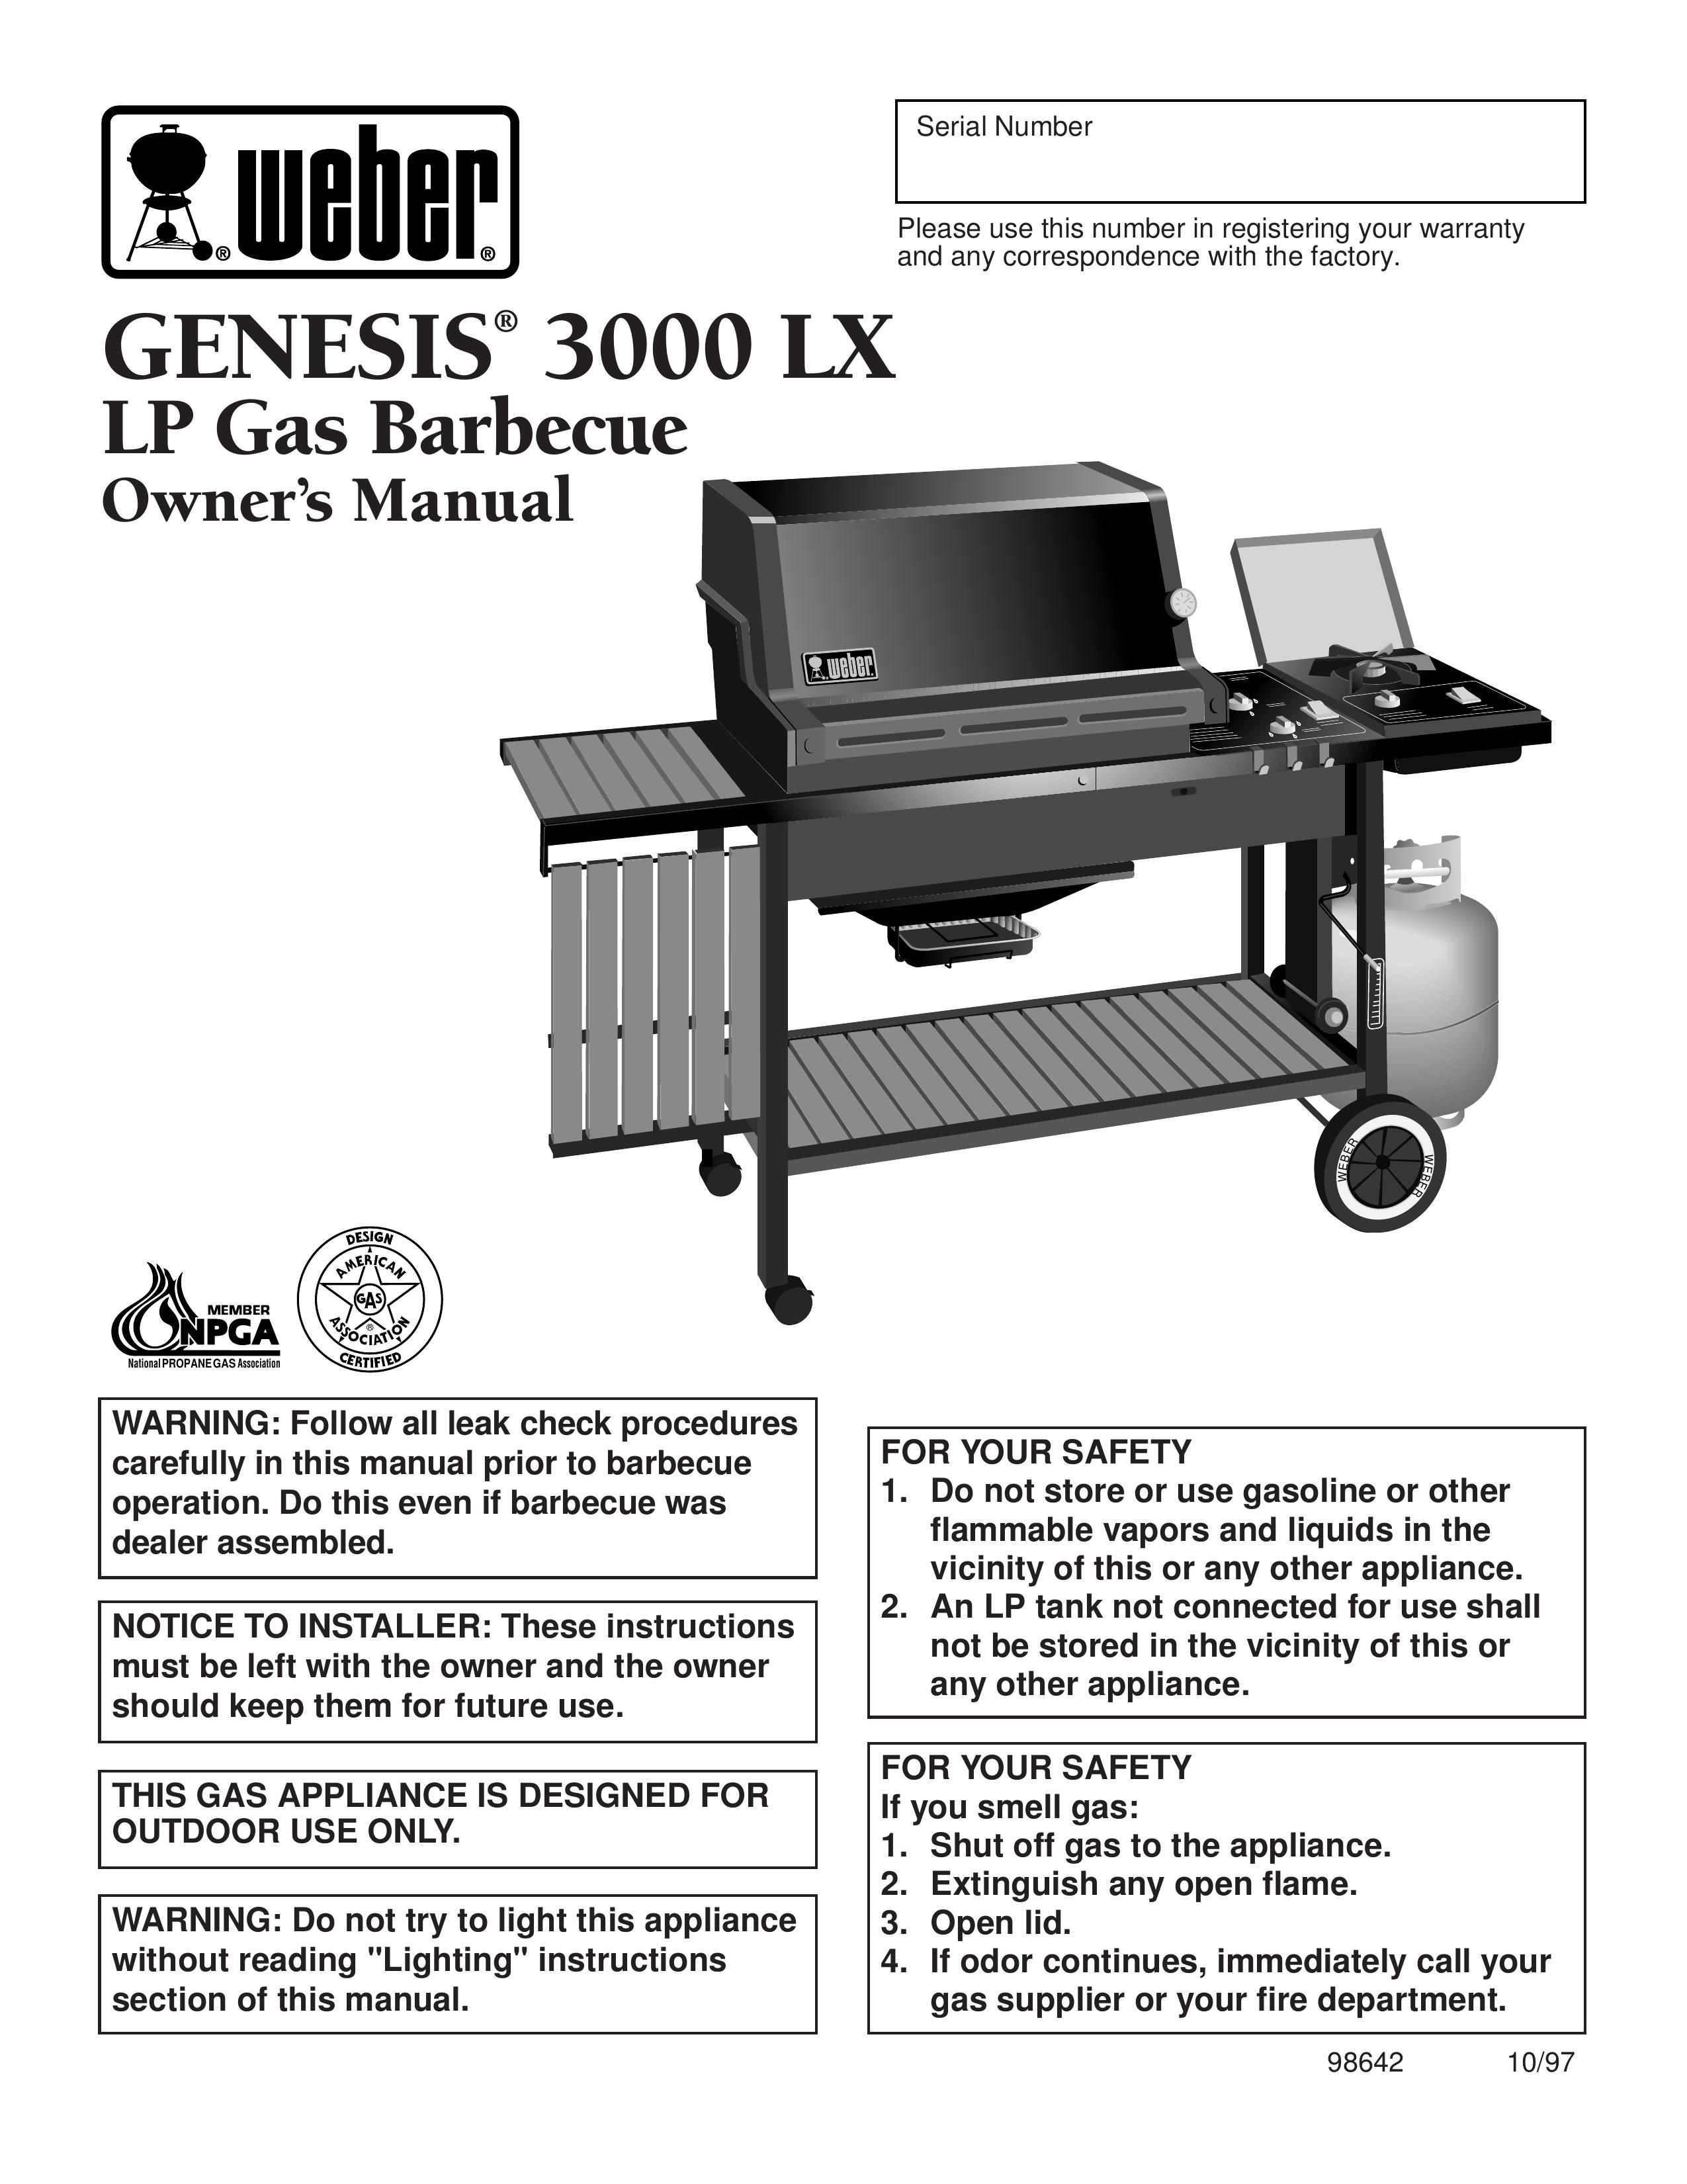 Weber 3000 LX Gas Grill User Manual